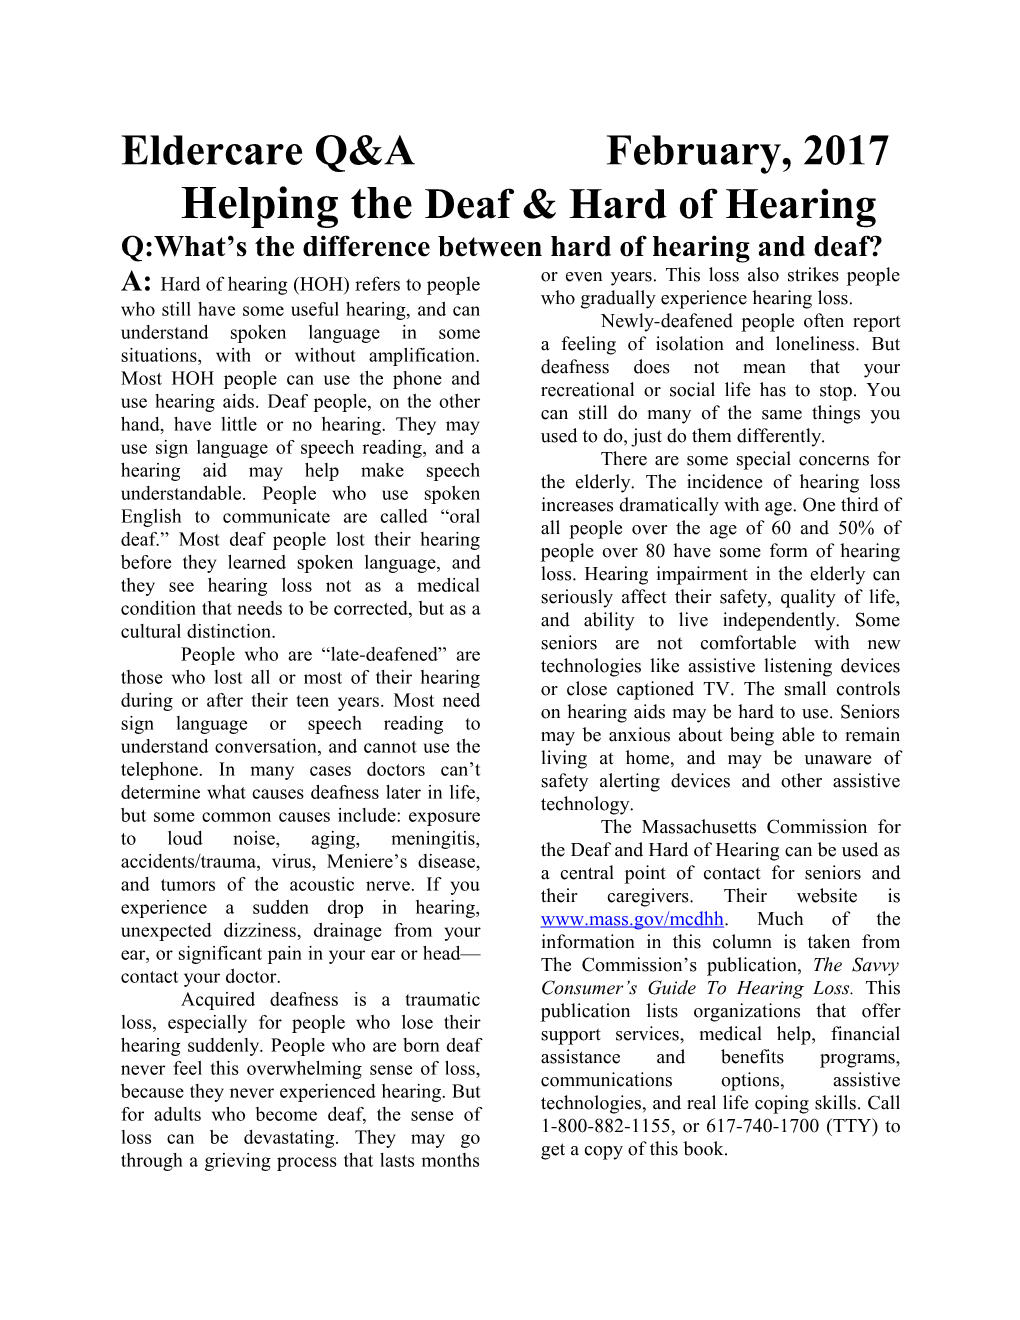 Q:What S the Difference Between Hard of Hearing and Deaf?